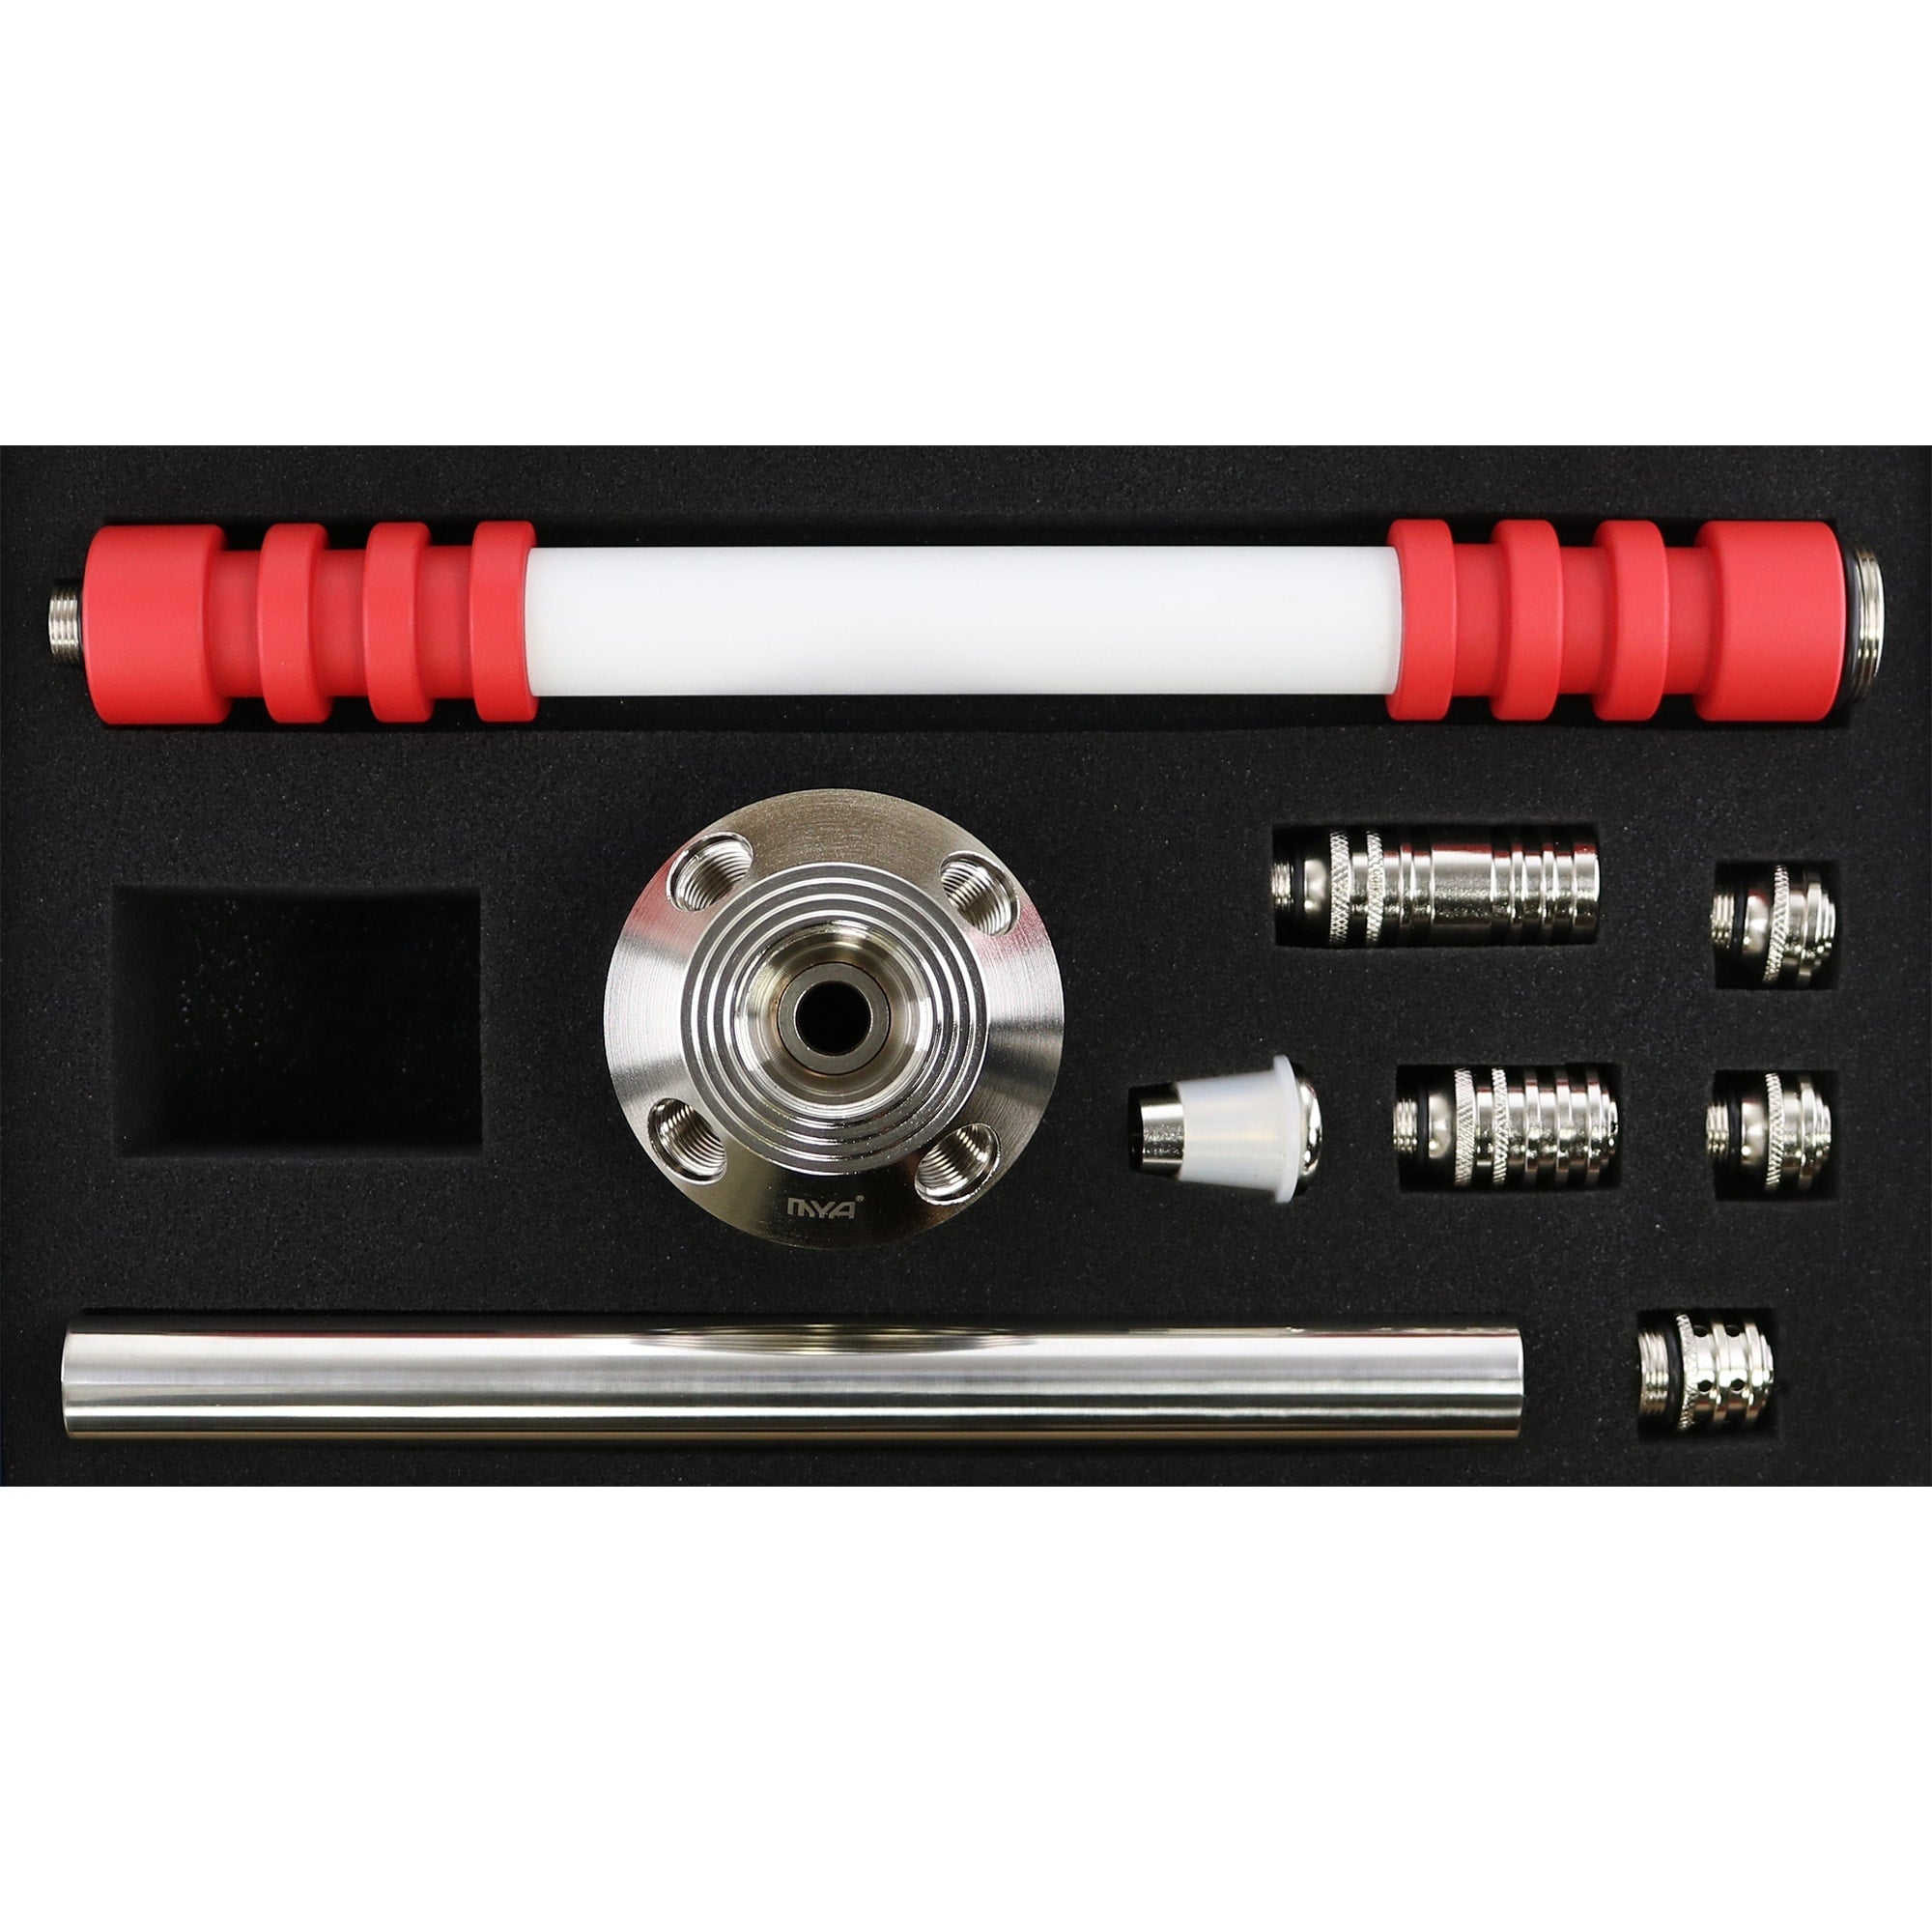 Red, White, Red MX Stem #stem color_Red/White/Red